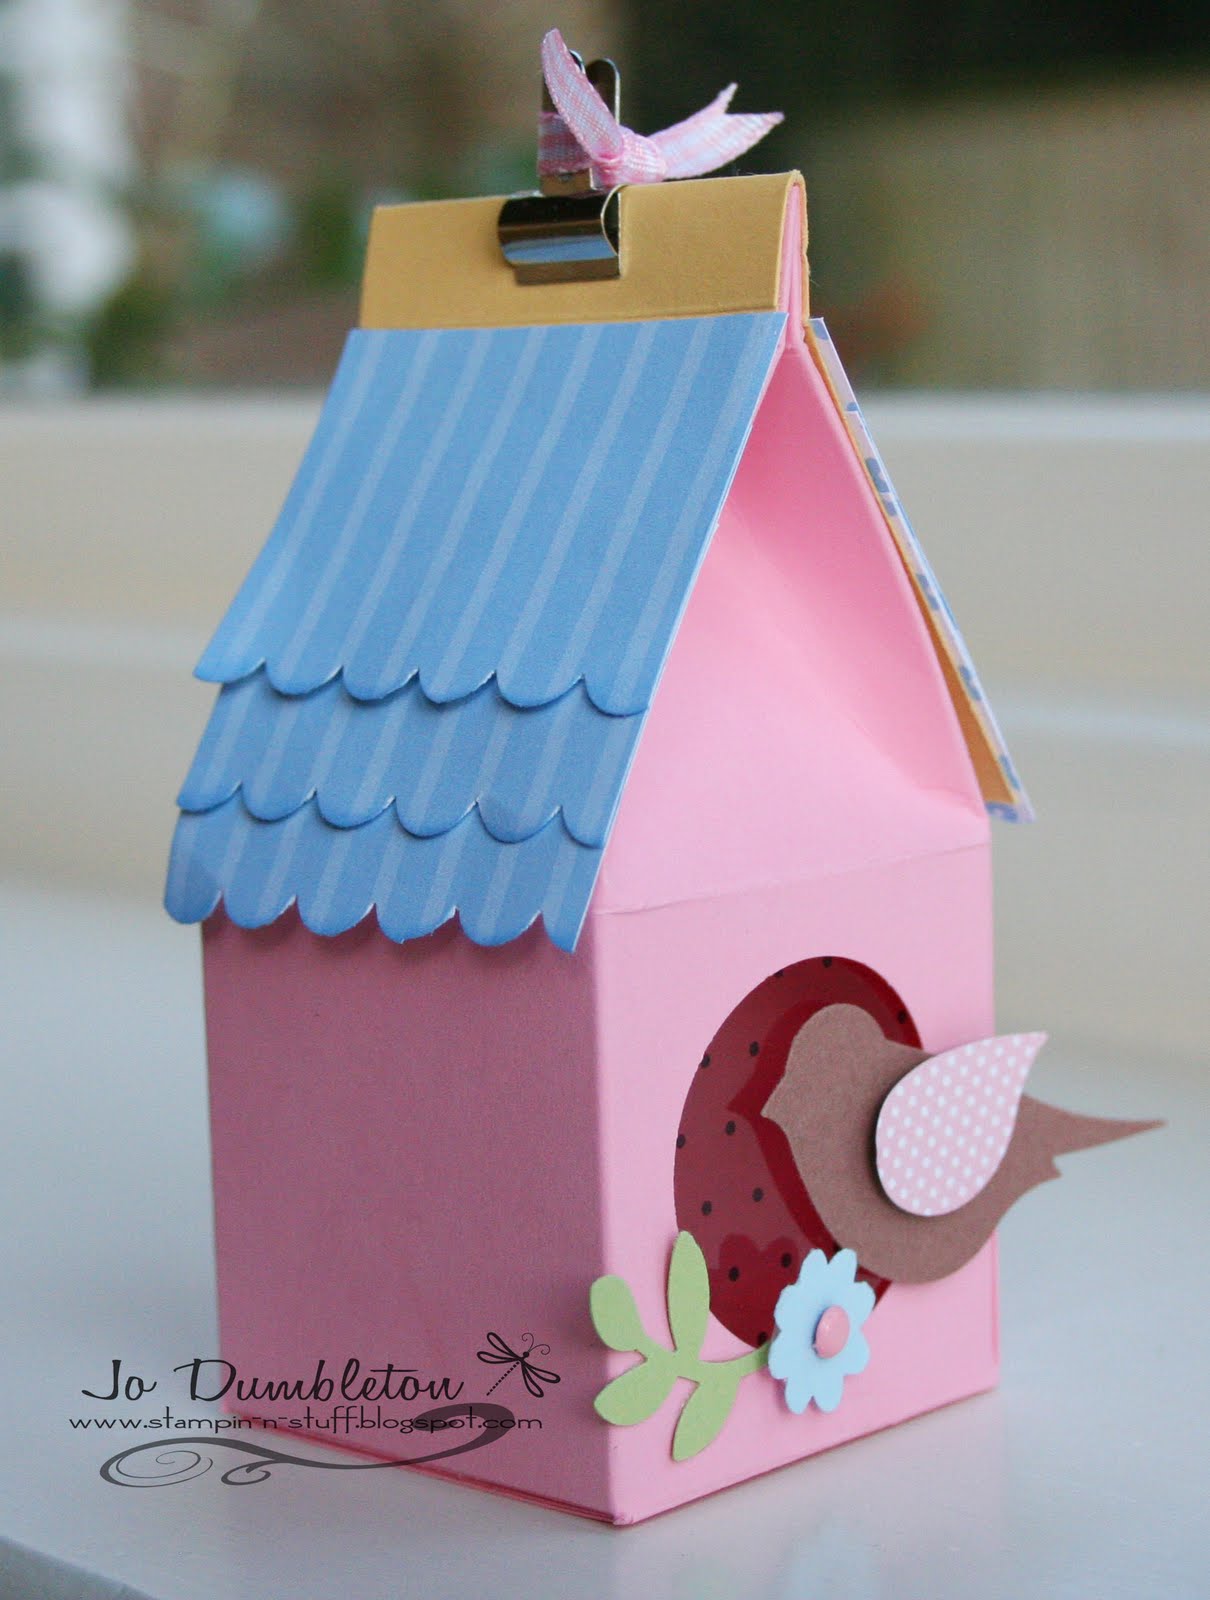 Stampin' 'n Stuff: Birdhouse Tutorial and Template